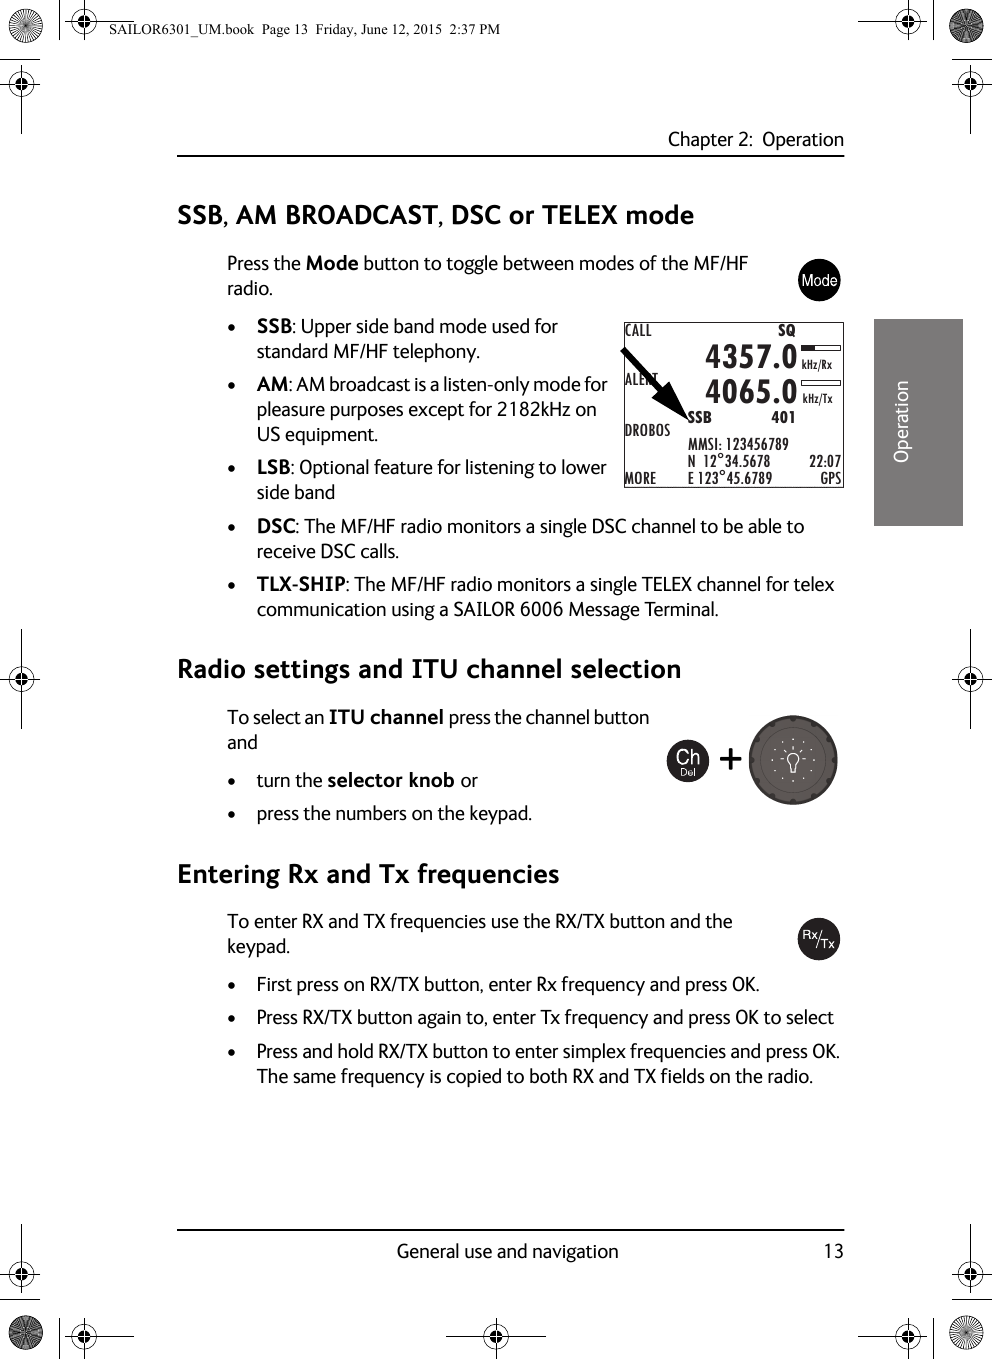 Chapter 2:  OperationGeneral use and navigation 1322222OperationSSB, AM BROADCAST, DSC or TELEX modePress the Mode button to toggle between modes of the MF/HF radio. •SSB: Upper side band mode used for standard MF/HF telephony.•AM: AM broadcast is a listen-only mode for pleasure purposes except for 2182kHz on US equipment.•LSB: Optional feature for listening to lower side band•DSC: The MF/HF radio monitors a single DSC channel to be able to receive DSC calls.•TLX-SHIP: The MF/HF radio monitors a single TELEX channel for telex communication using a SAILOR 6006 Message Terminal.Radio settings and ITU channel selectionTo select an ITU channel press the channel button and• turn the selector knob or• press the numbers on the keypad.Entering Rx and Tx frequenciesTo enter RX and TX frequencies use the RX/TX button and the keypad. • First press on RX/TX button, enter Rx frequency and press OK.• Press RX/TX button again to, enter Tx frequency and press OK to select• Press and hold RX/TX button to enter simplex frequencies and press OK. The same frequency is copied to both RX and TX fields on the radio.CALLALERTDROBOSMOREMMSI: 123456789N  12°34.5678E 123°45.6789 GPS4357.04065.0SSB              401SQkHz/TxkHz/Rx22:07+SAILOR6301_UM.book  Page 13  Friday, June 12, 2015  2:37 PM